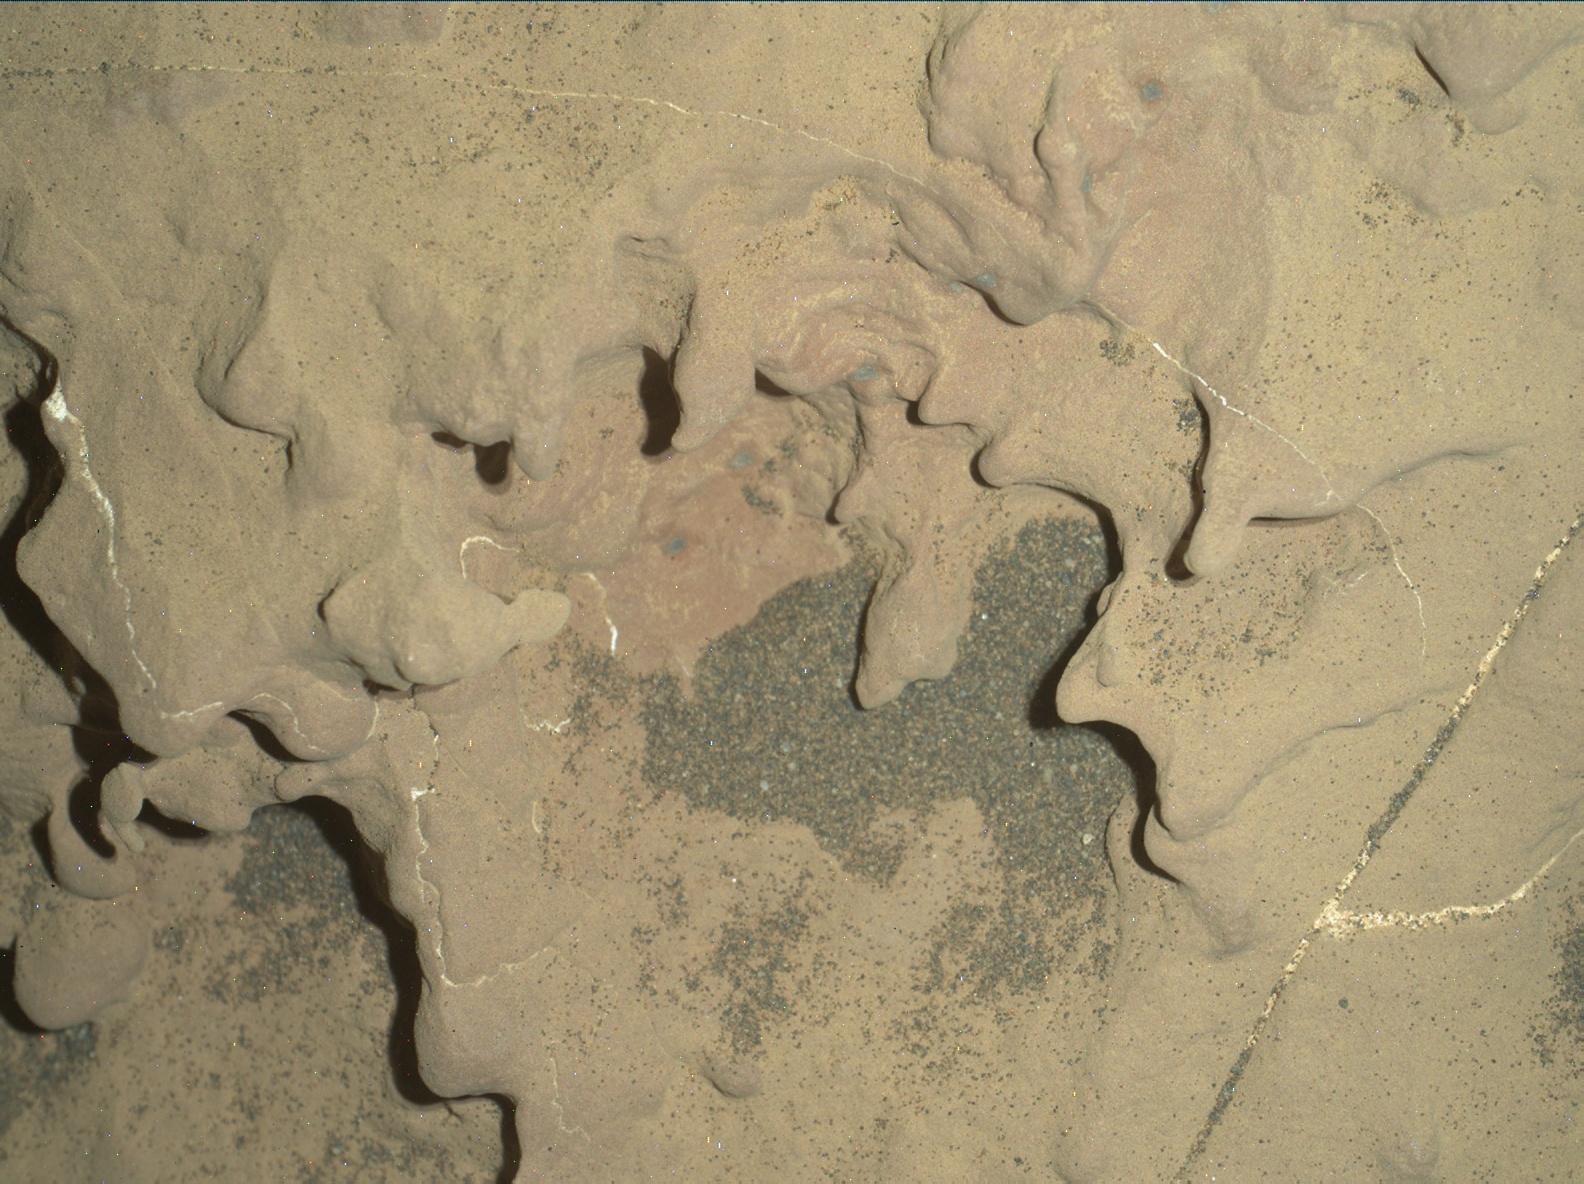 Nasa's Mars rover Curiosity acquired this image using its Mars Hand Lens Imager (MAHLI) on Sol 1865